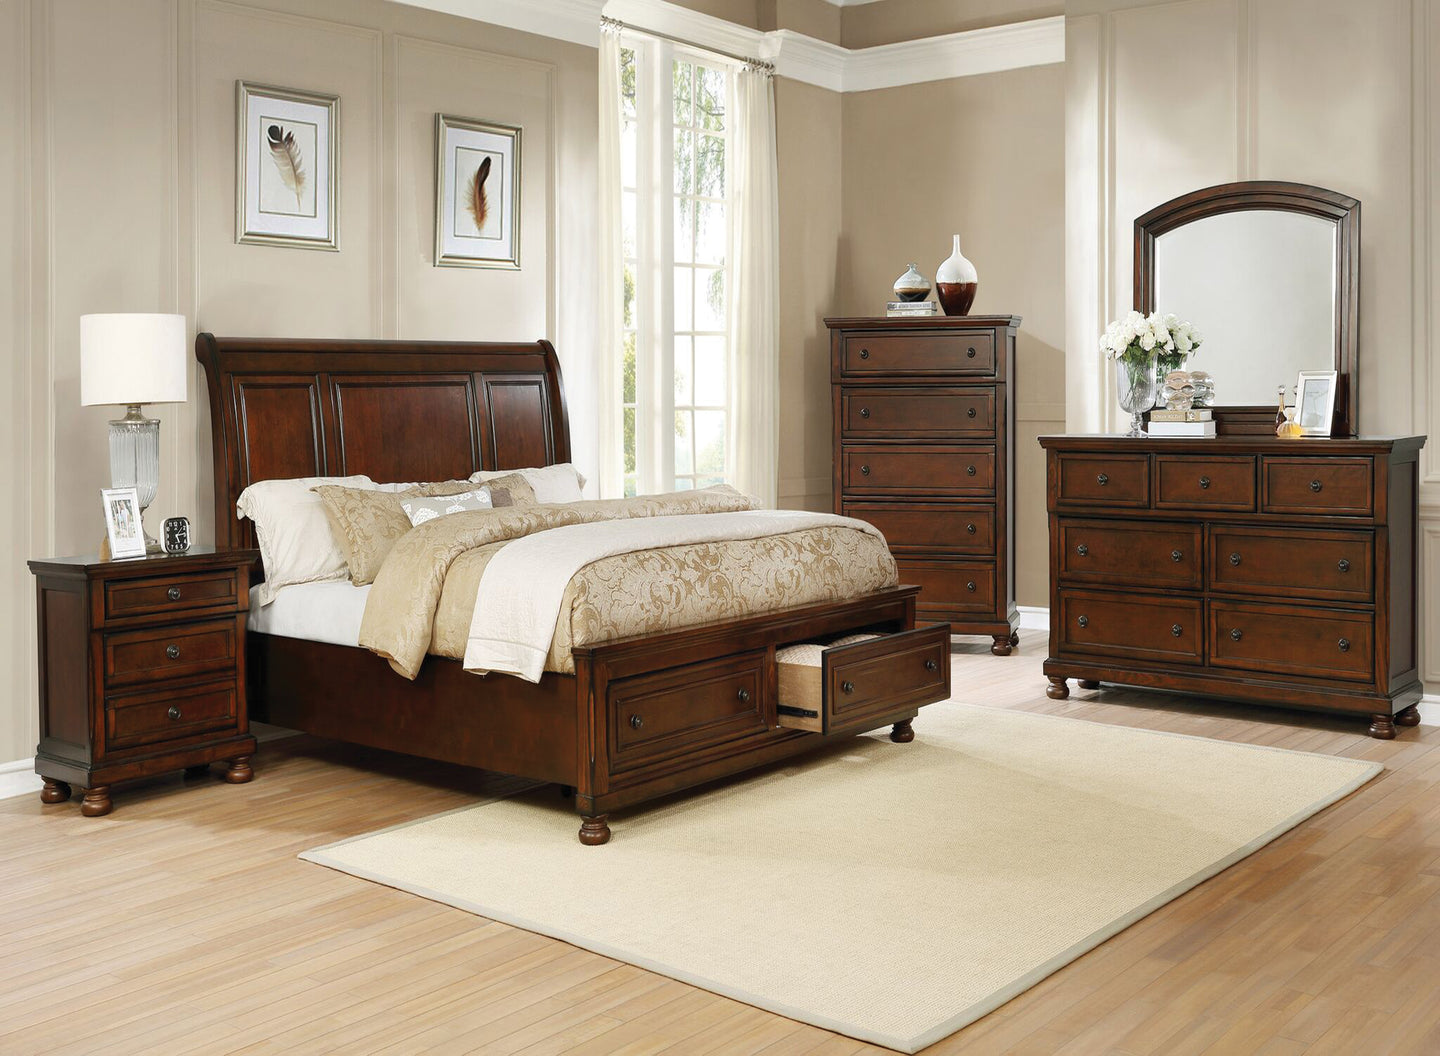 Transitional Style Bedroom In A Brown Cherry Finish